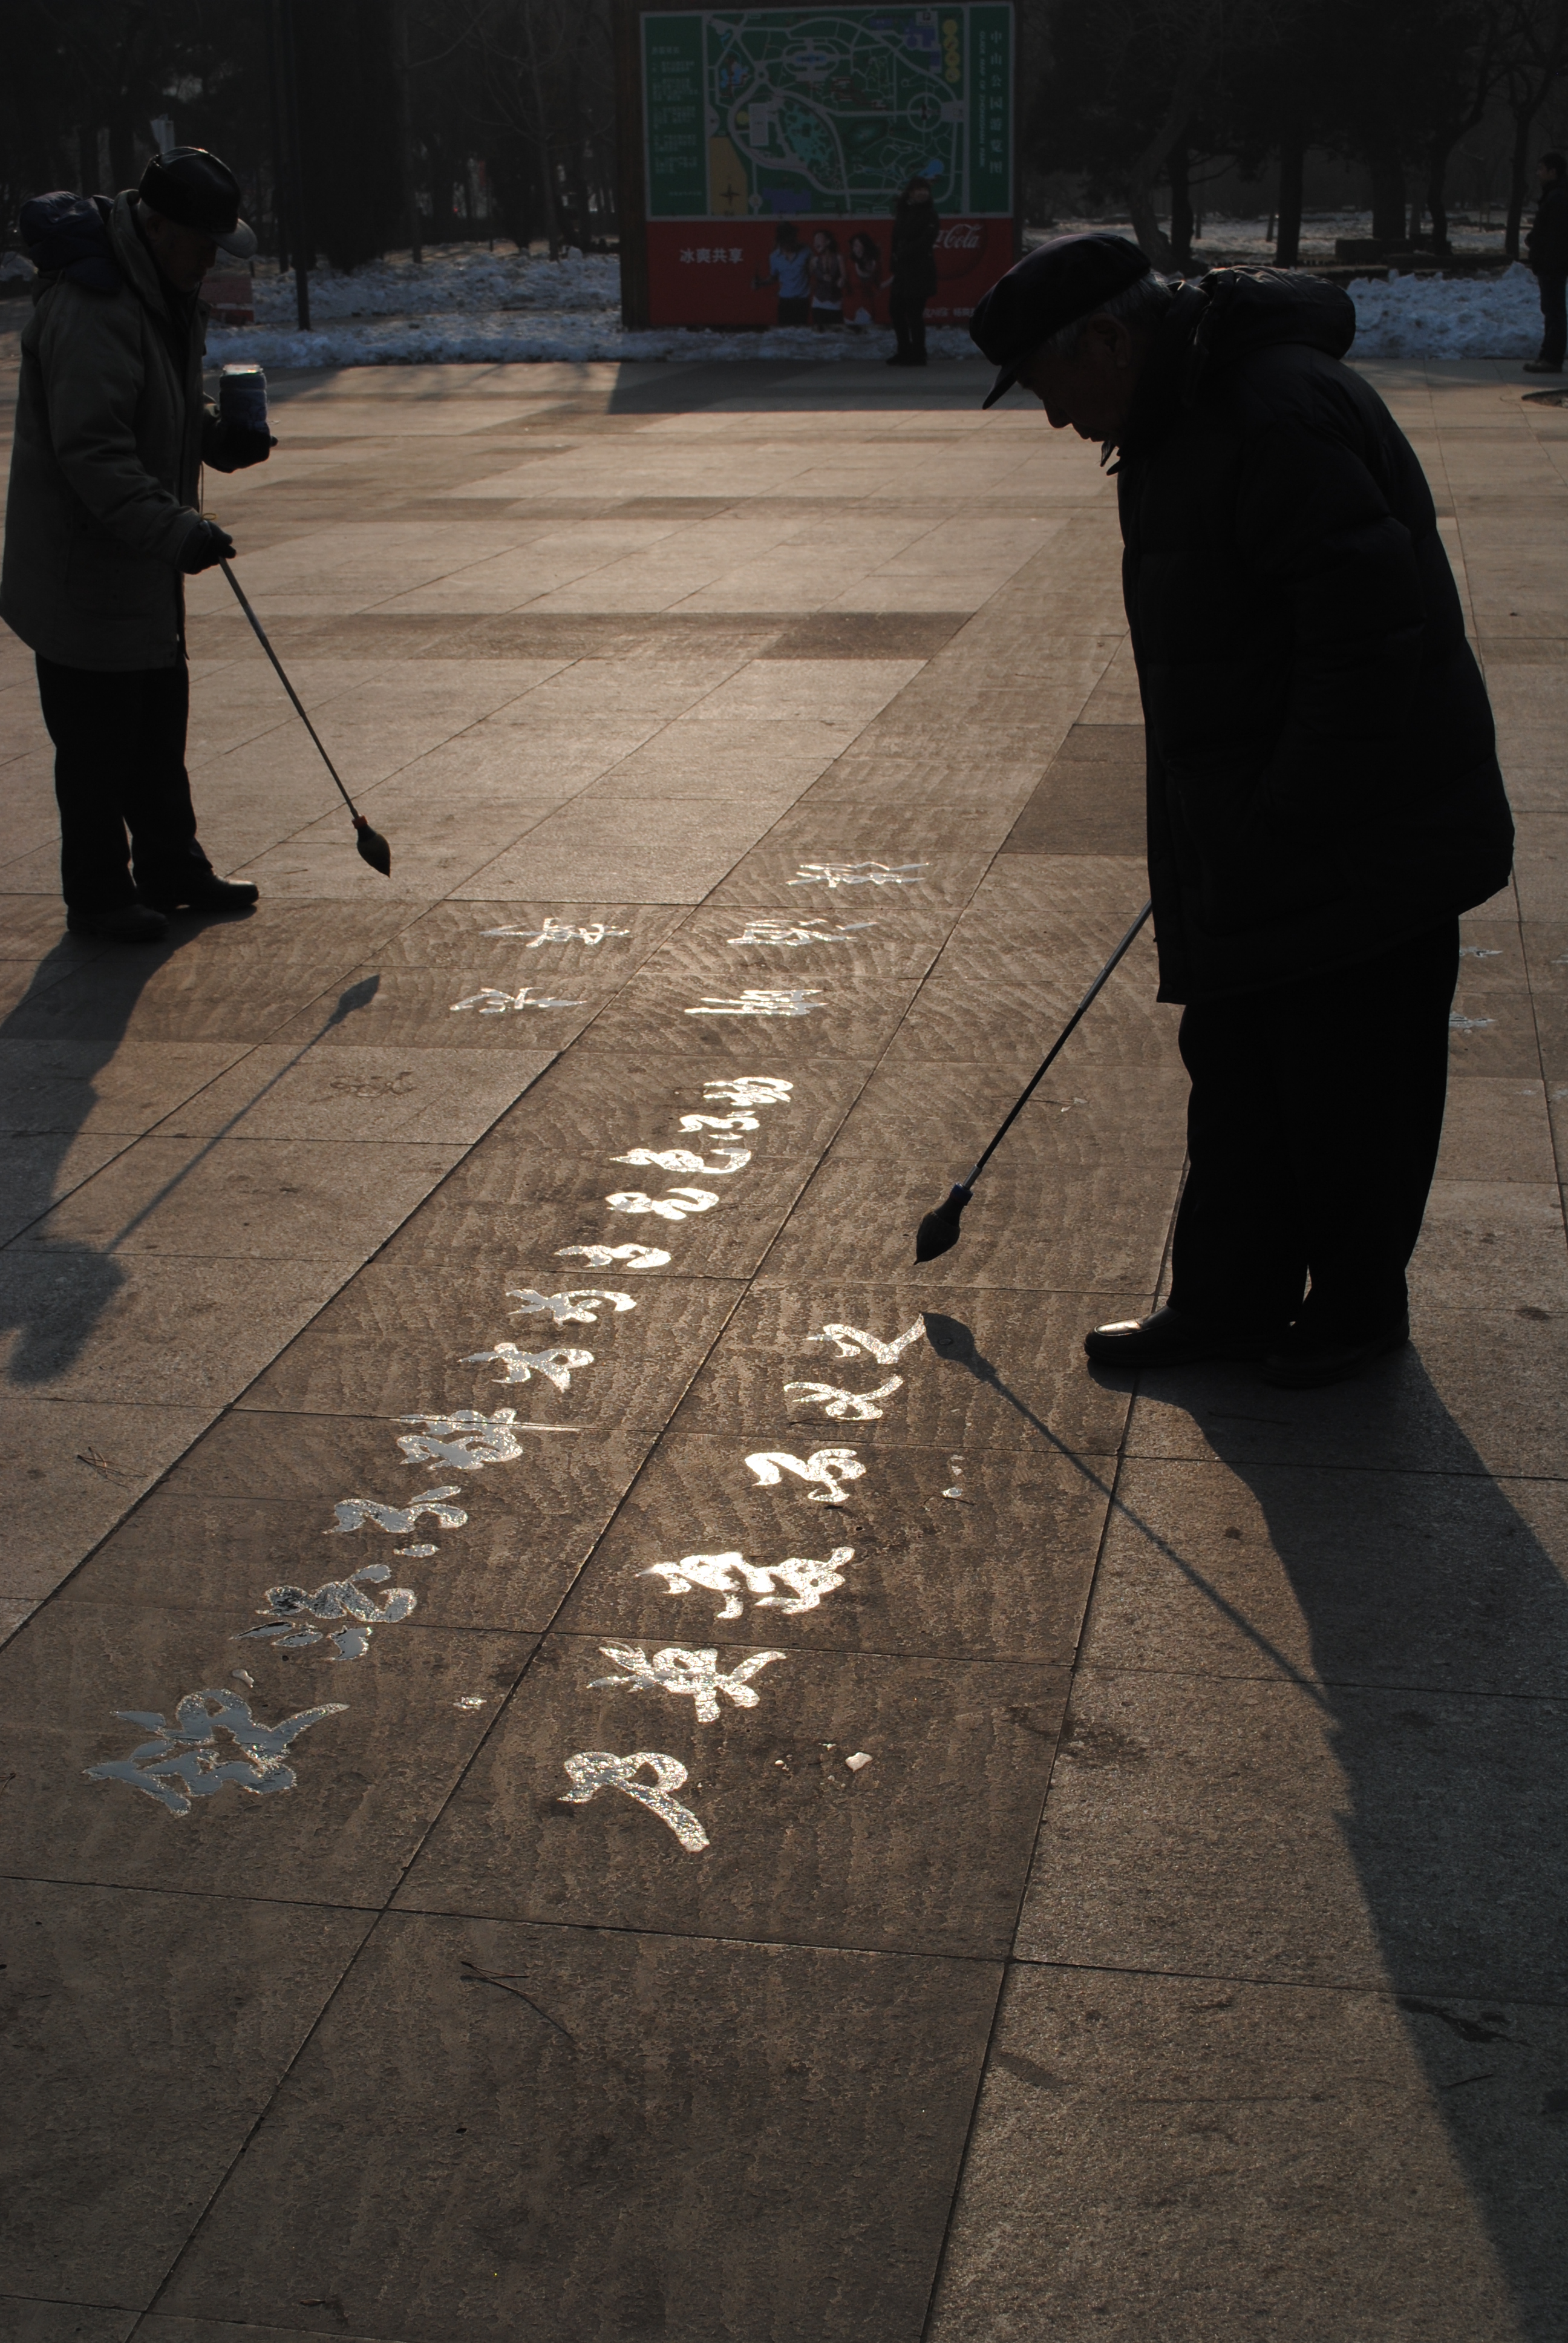 Two Chinese men are writing calligraphy on the concrete in an outdoor area